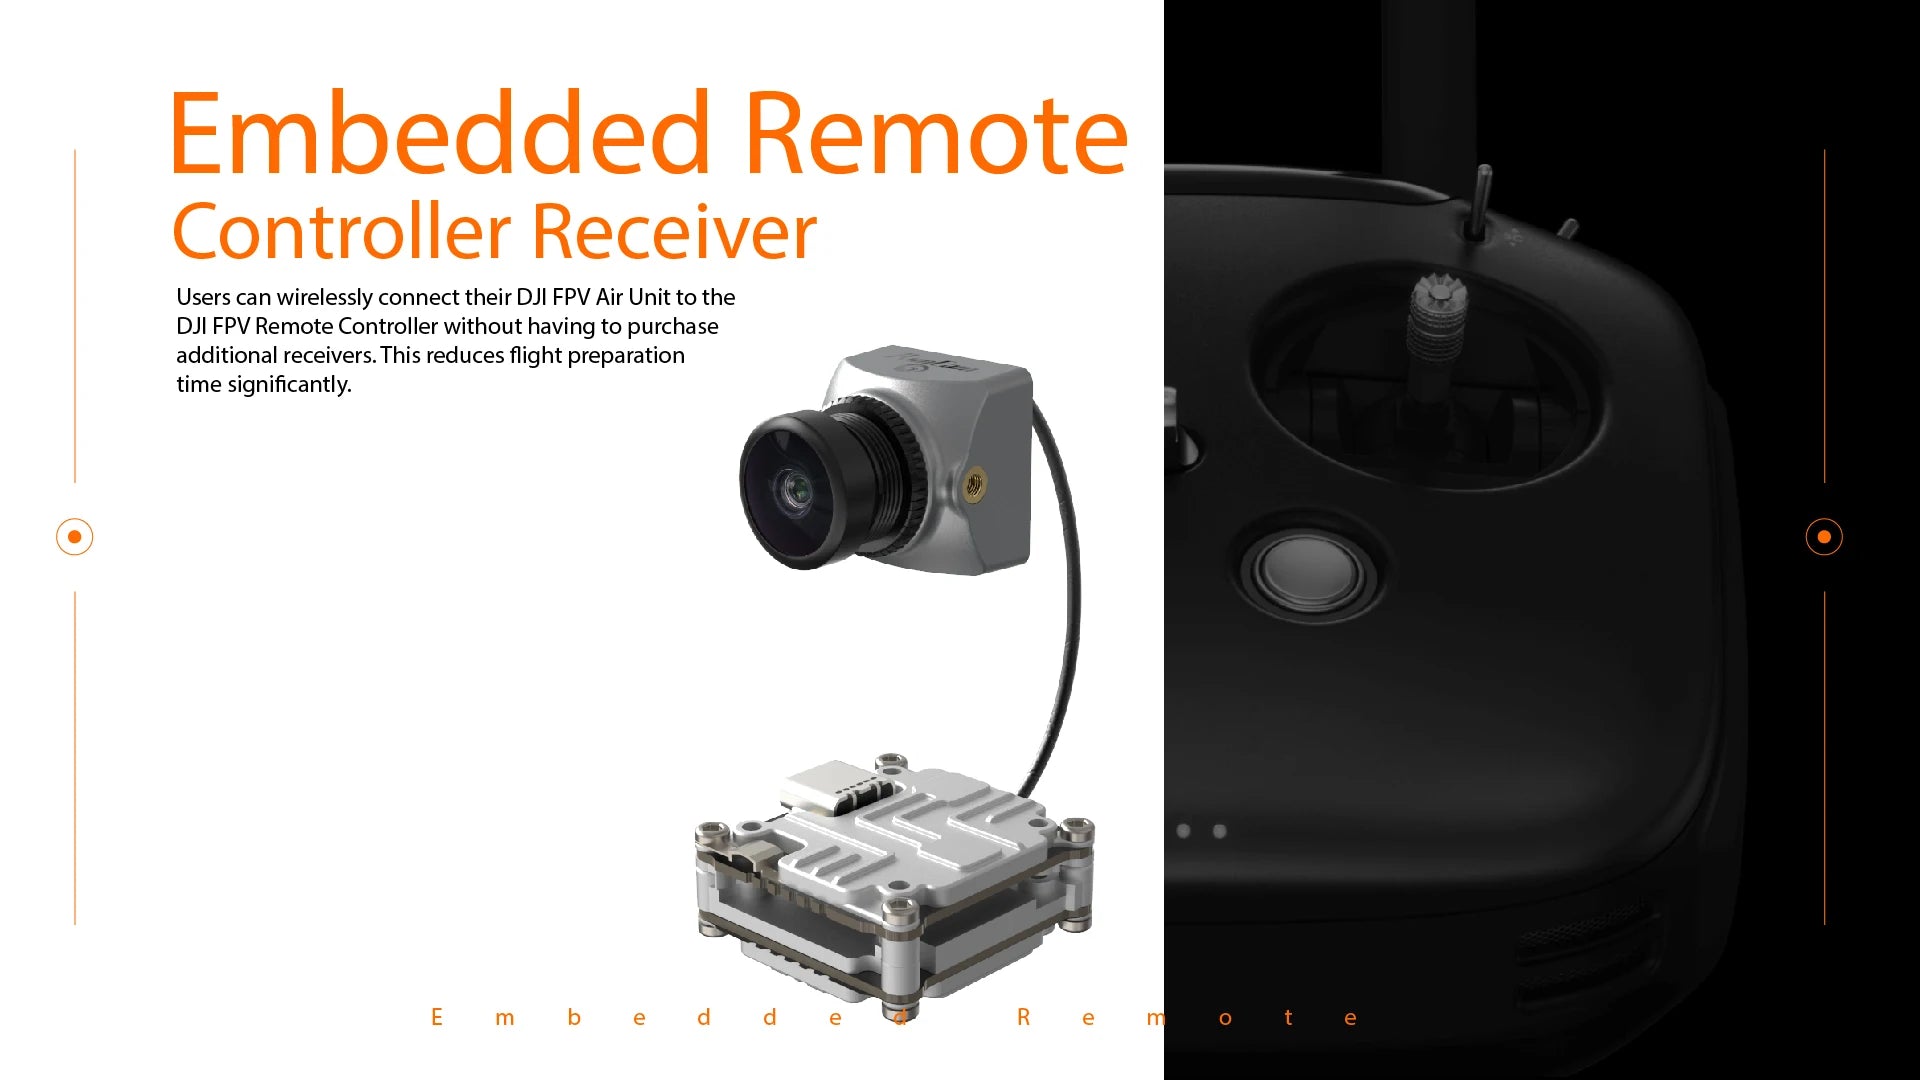 Embedded Remote Controller Receiver Users can wirelessly connect their DJI FPV